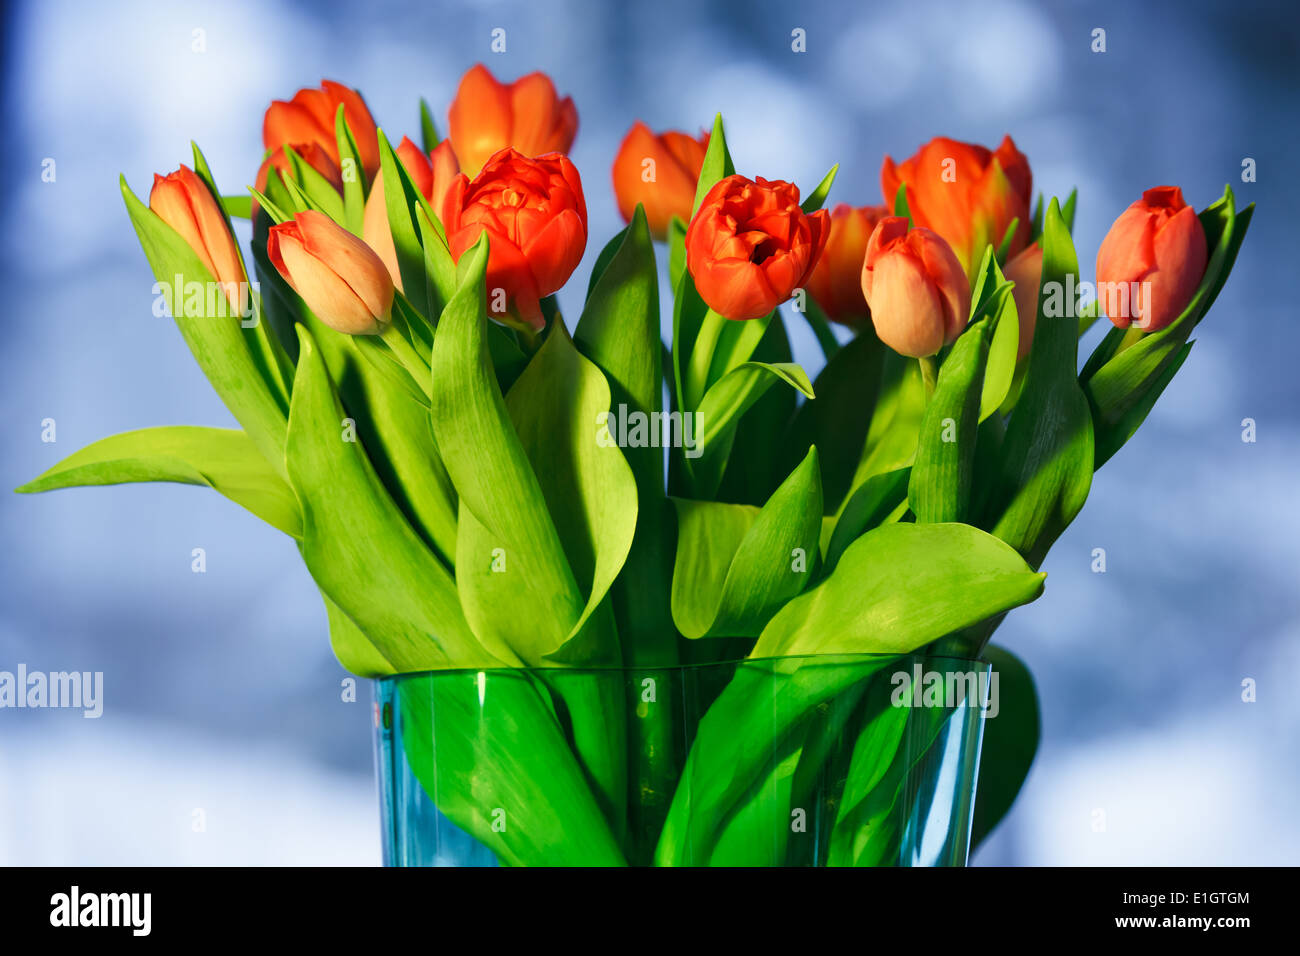 Bunch of tulips in glass vase on winter background. Stock Photo